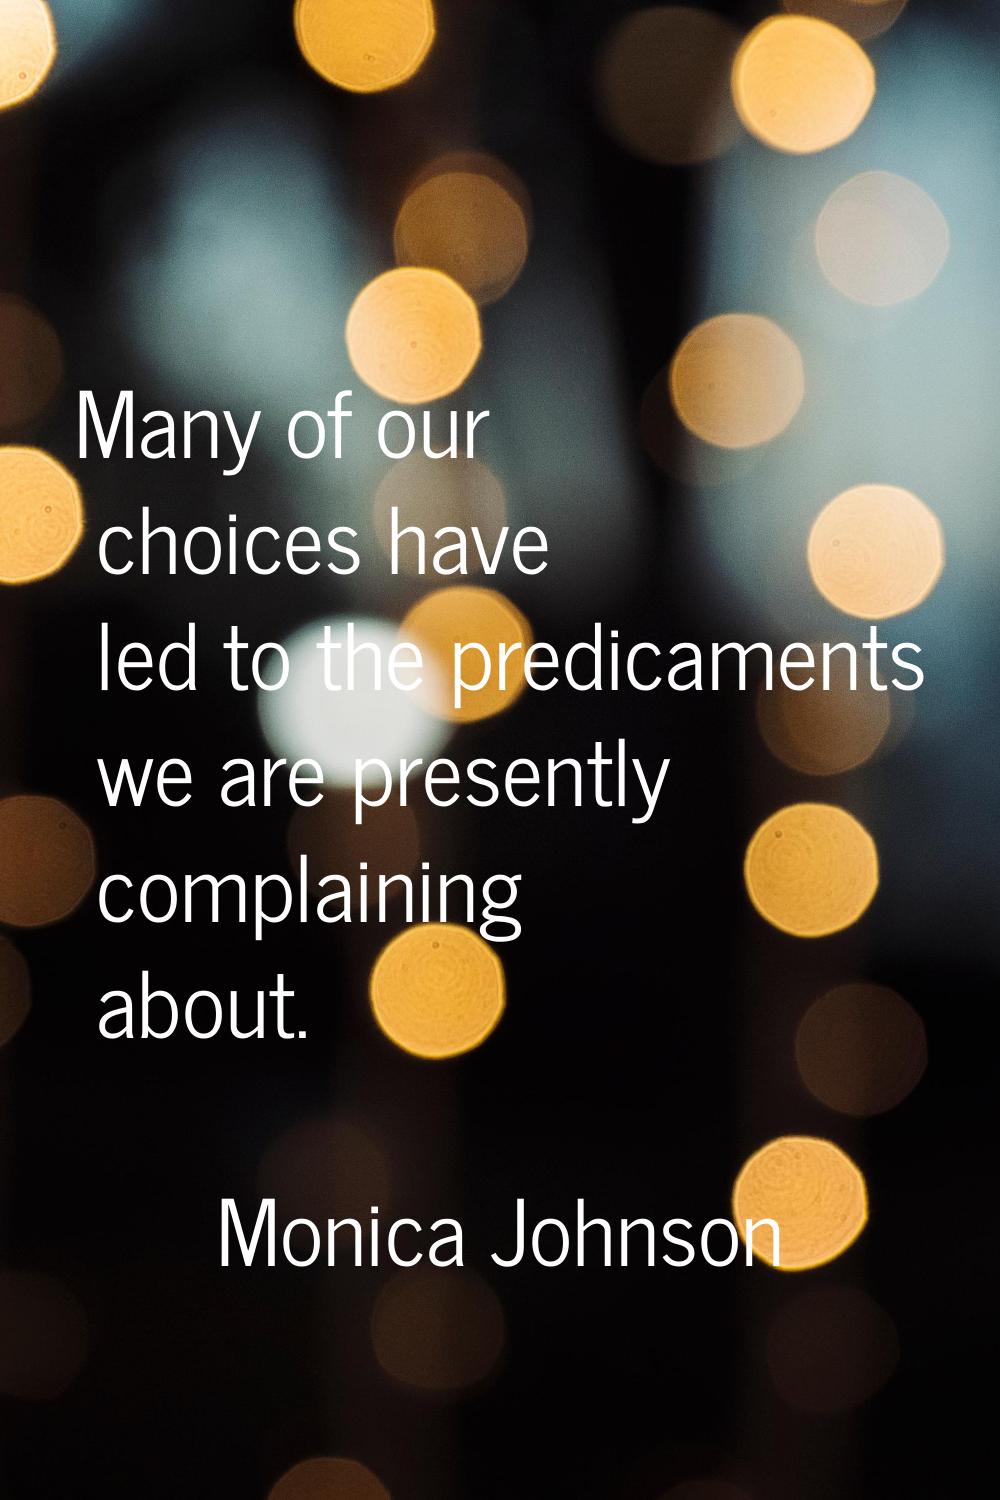 Many of our choices have led to the predicaments we are presently complaining about.